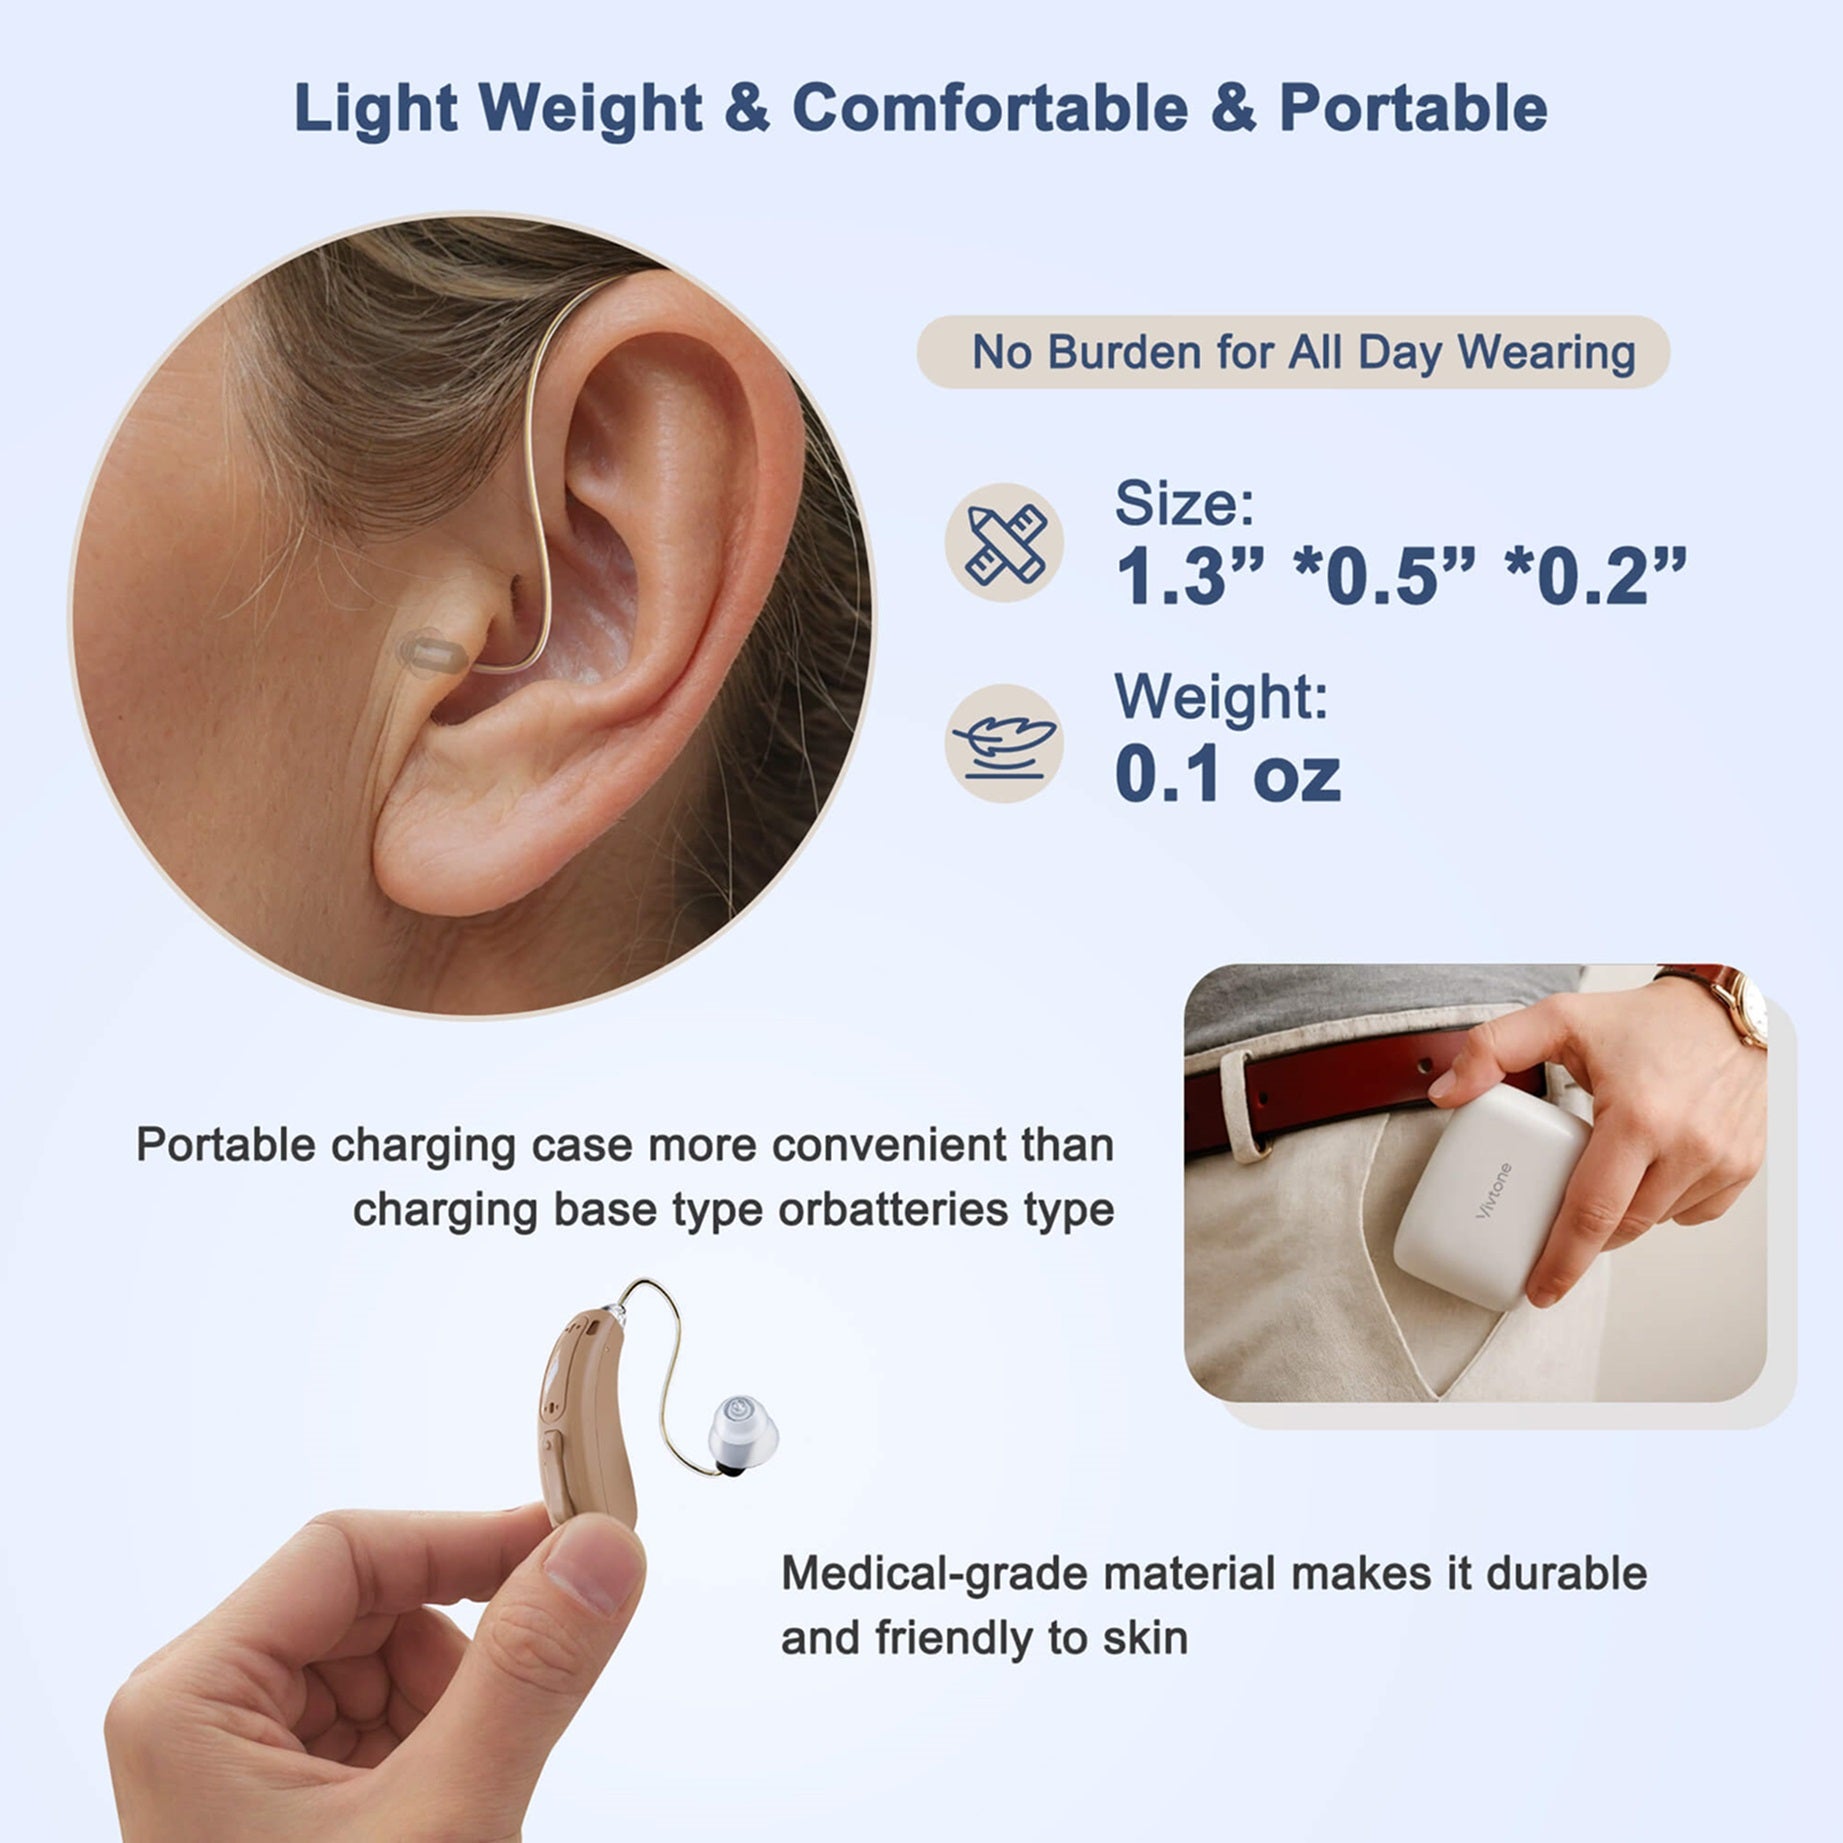 In Ear Hearing Aid - Lucid516 RIC-c1: Consumer Reports Best, Comfortable and Invisible, Best Inexpensive Hearing Aids